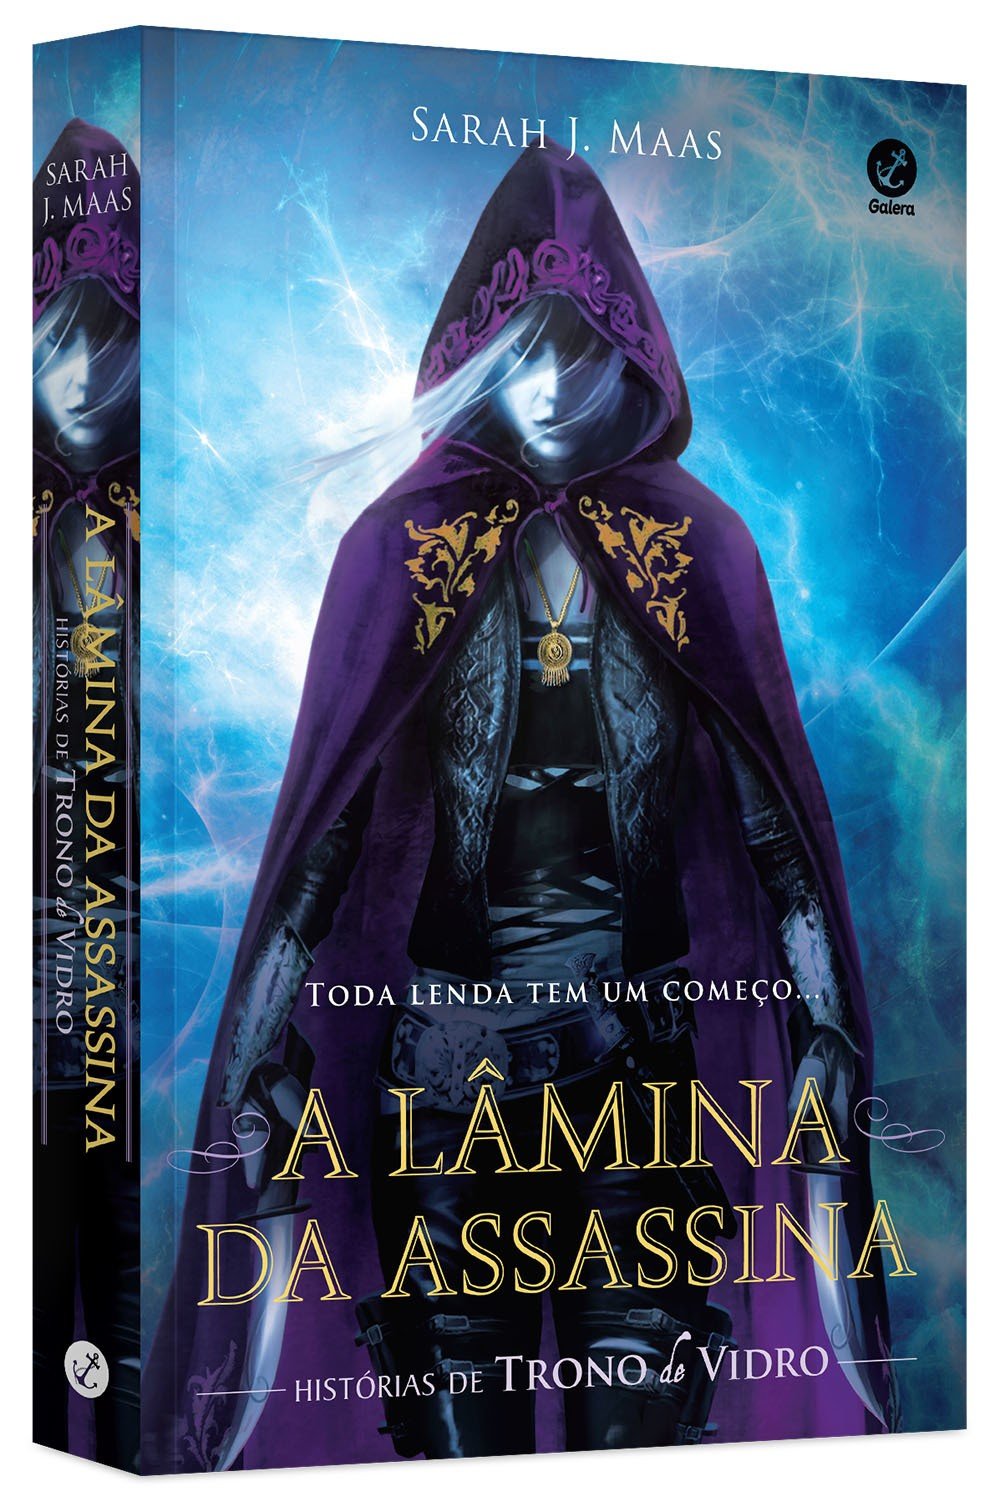 Throne of Glass: The Right Order to Read the Saga